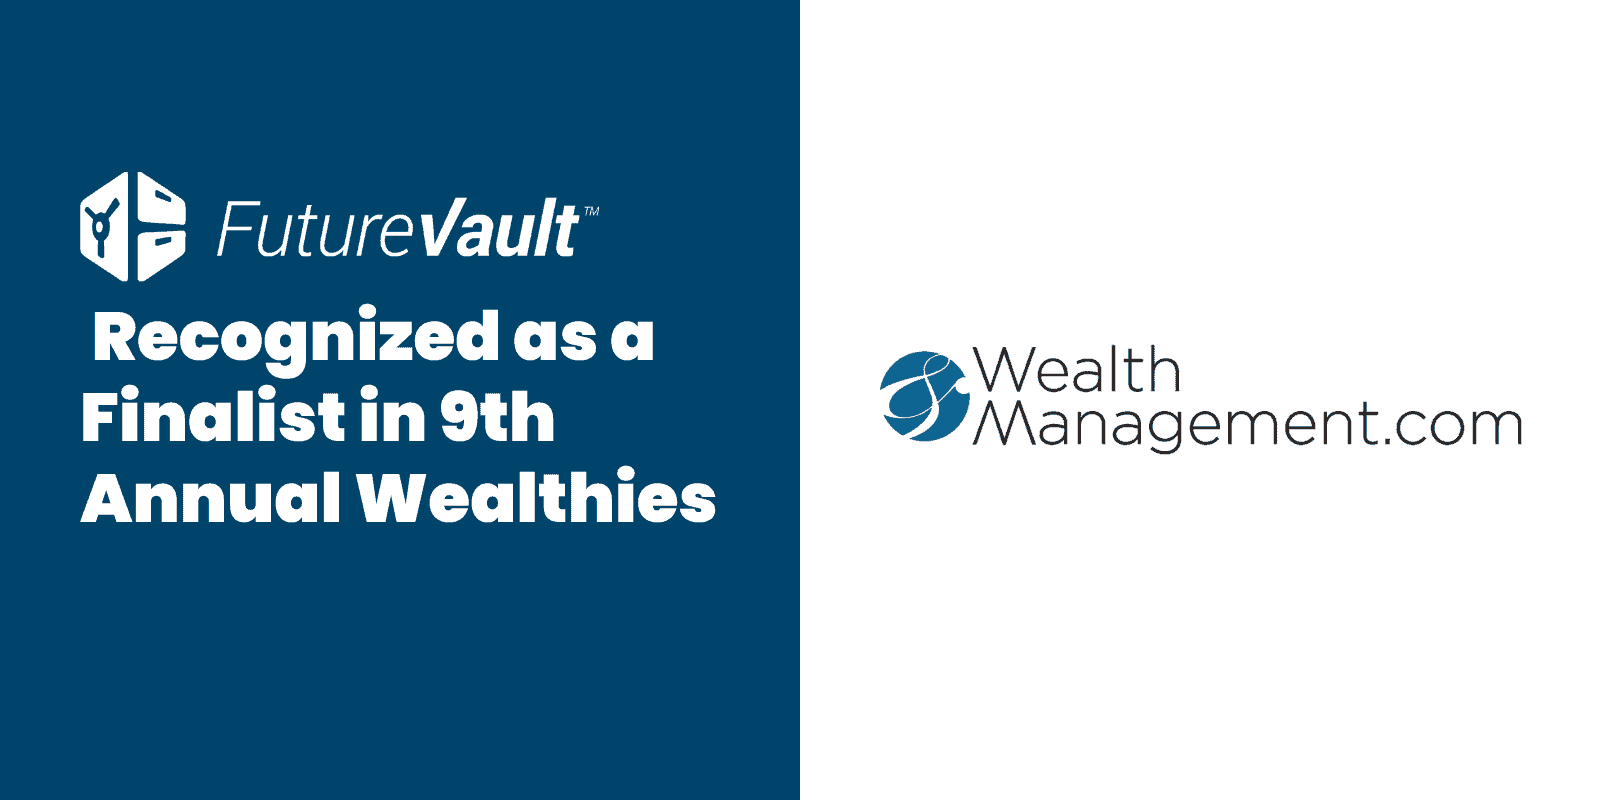 9th Annual Wealthies - FutureVault Recognized as a Finalist for Second Year in a Row